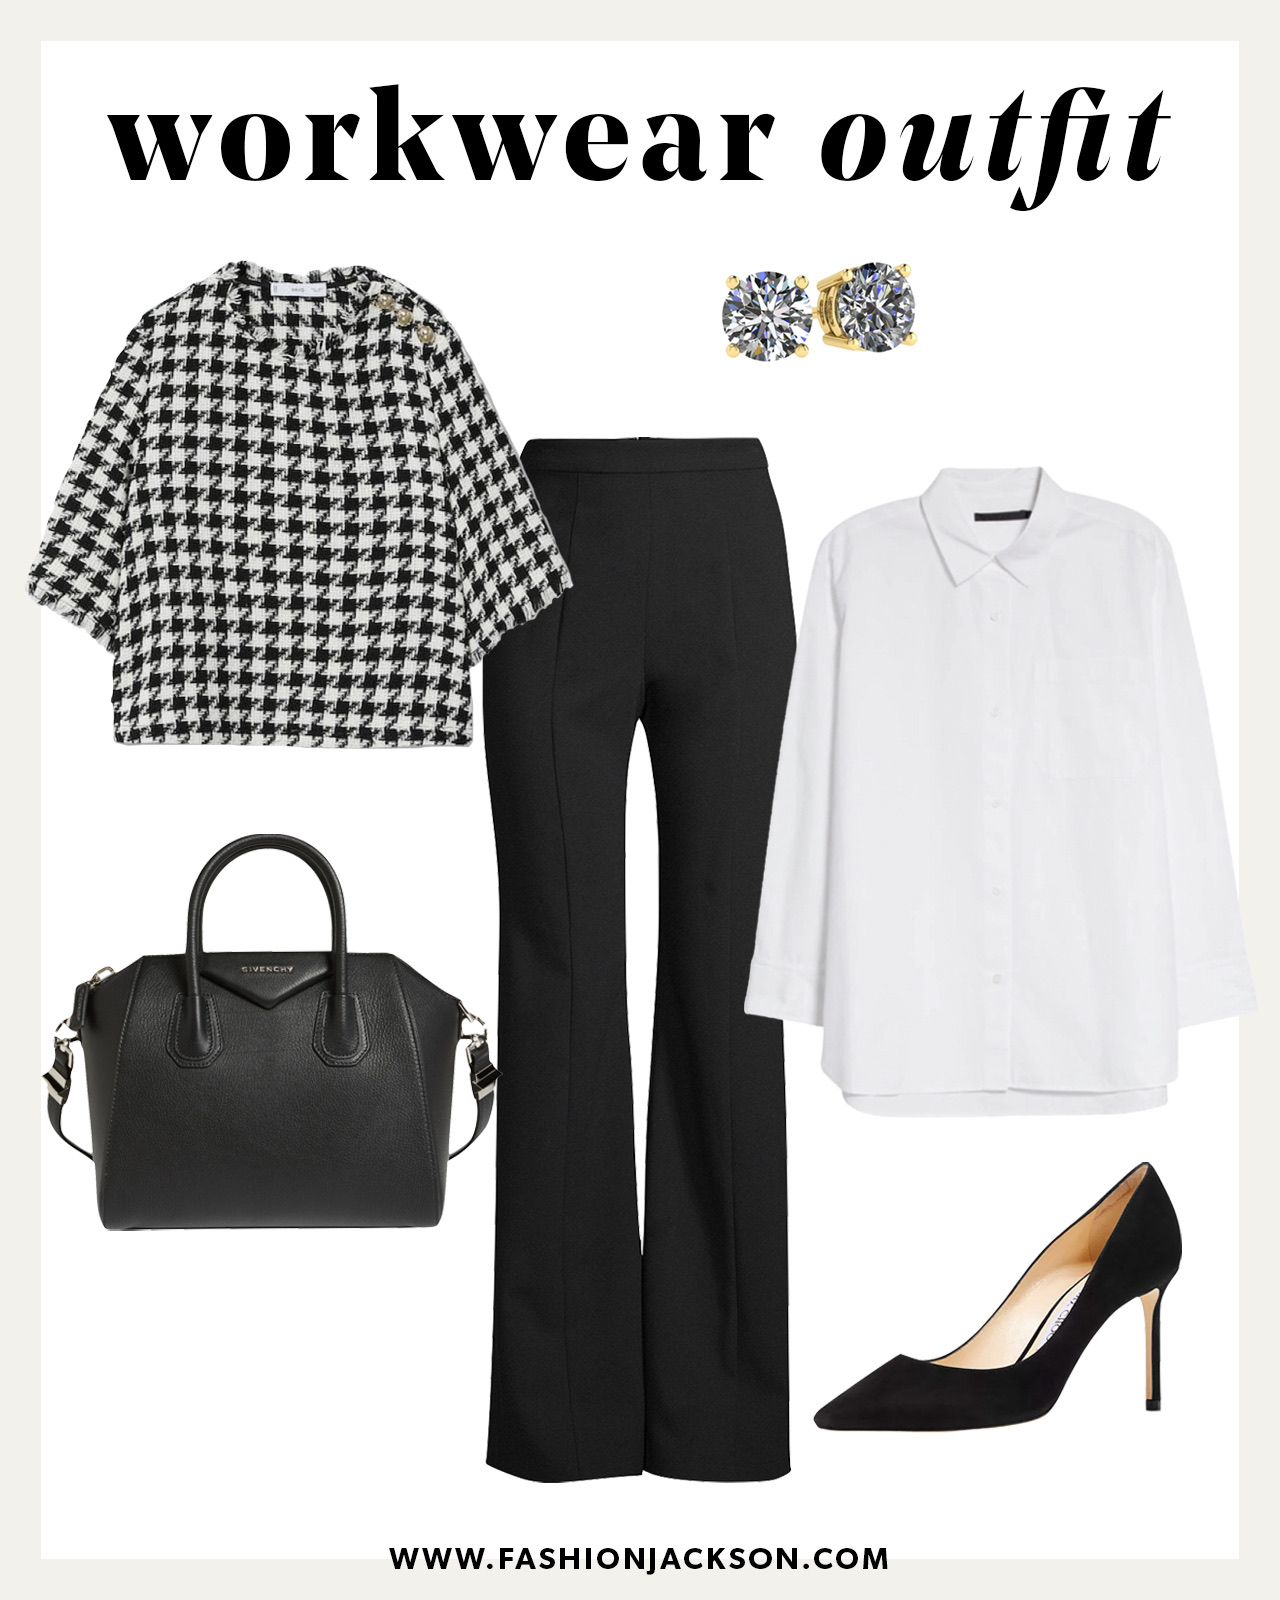 fall work outfits for 2022, workwear trends 2022, womens fall work clothes, modern workwear looks, workwear outfit ideas, workwear outfit inspiration, womens workwear essentials